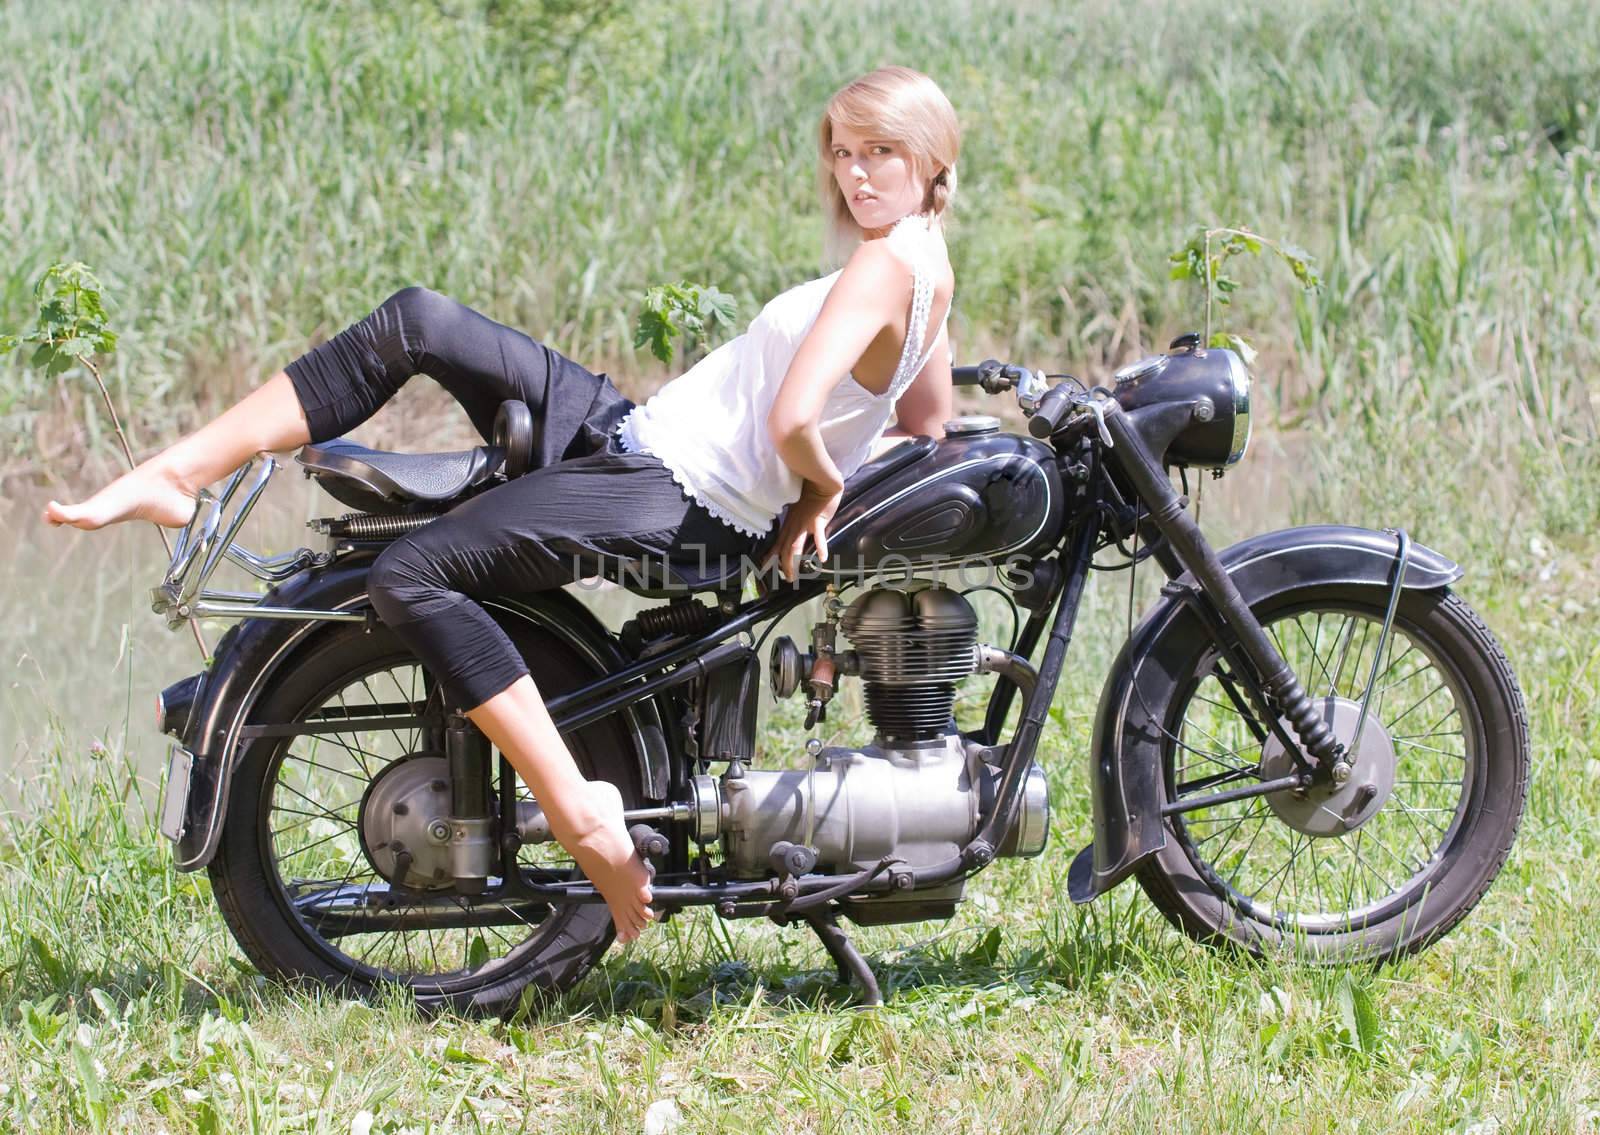 Young woman on motorcycle by STphotography